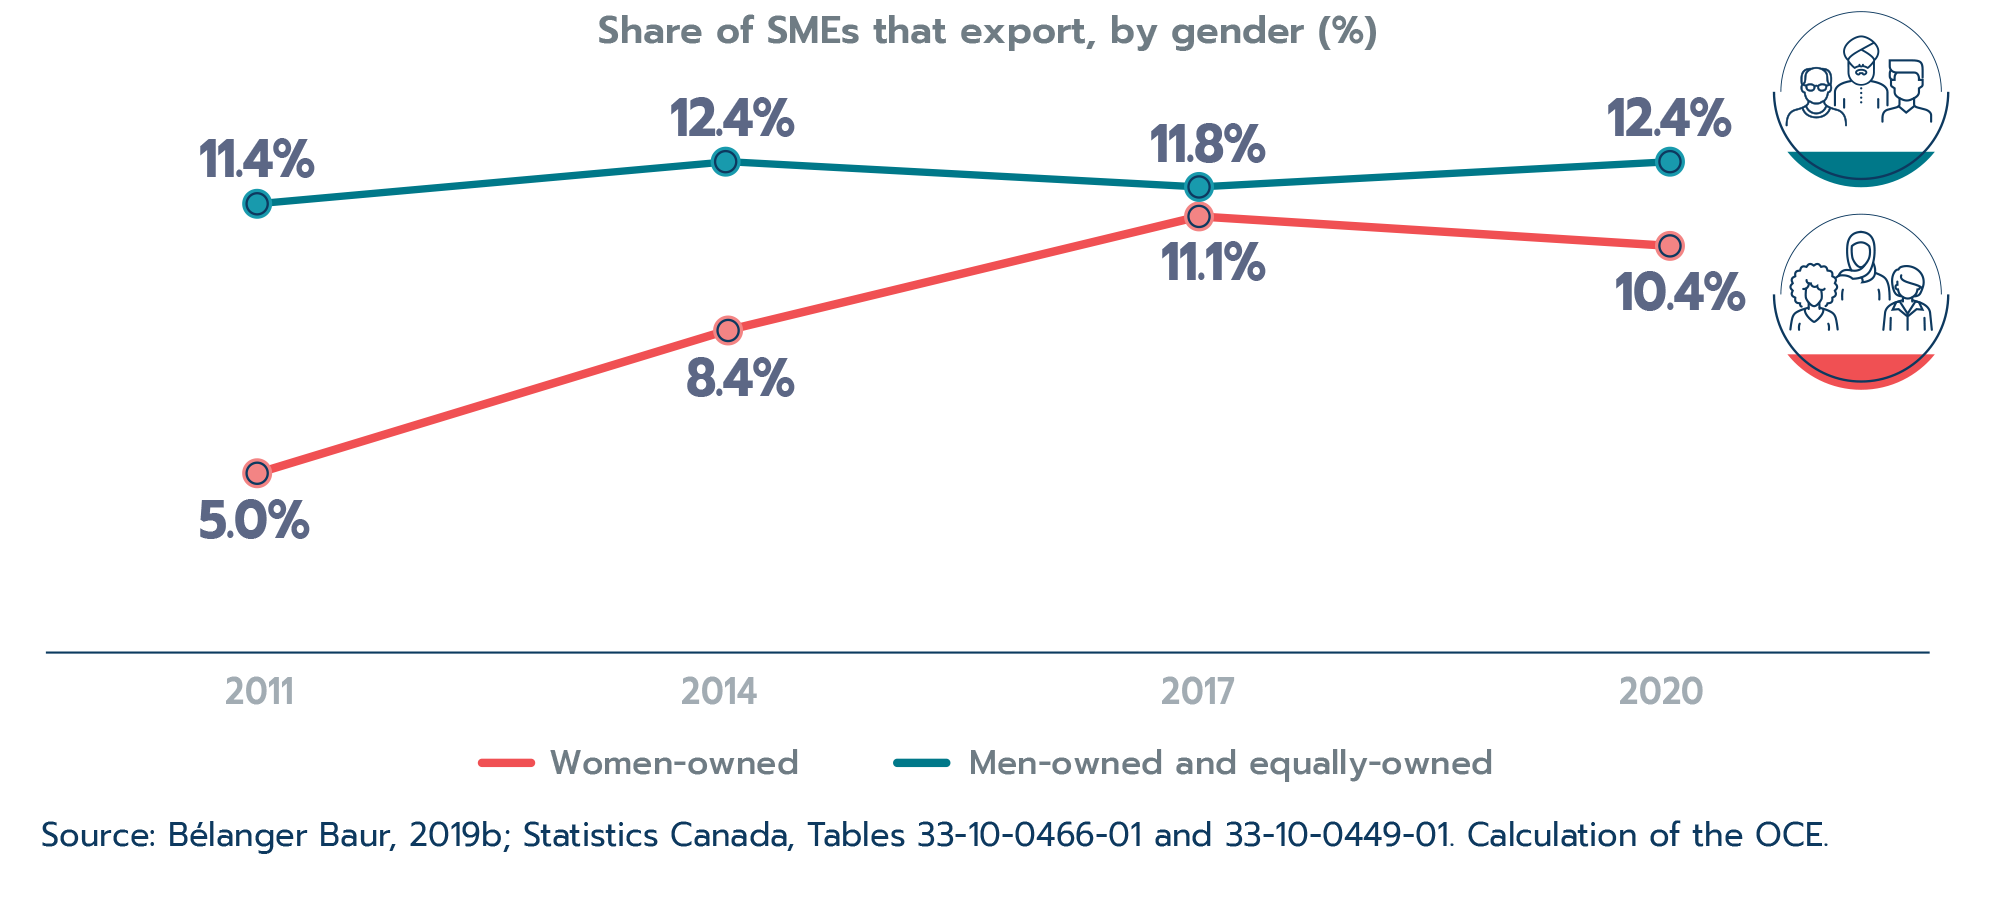 Figure 2.16: The gender gap in exporting has narrowed considerably over the last decade